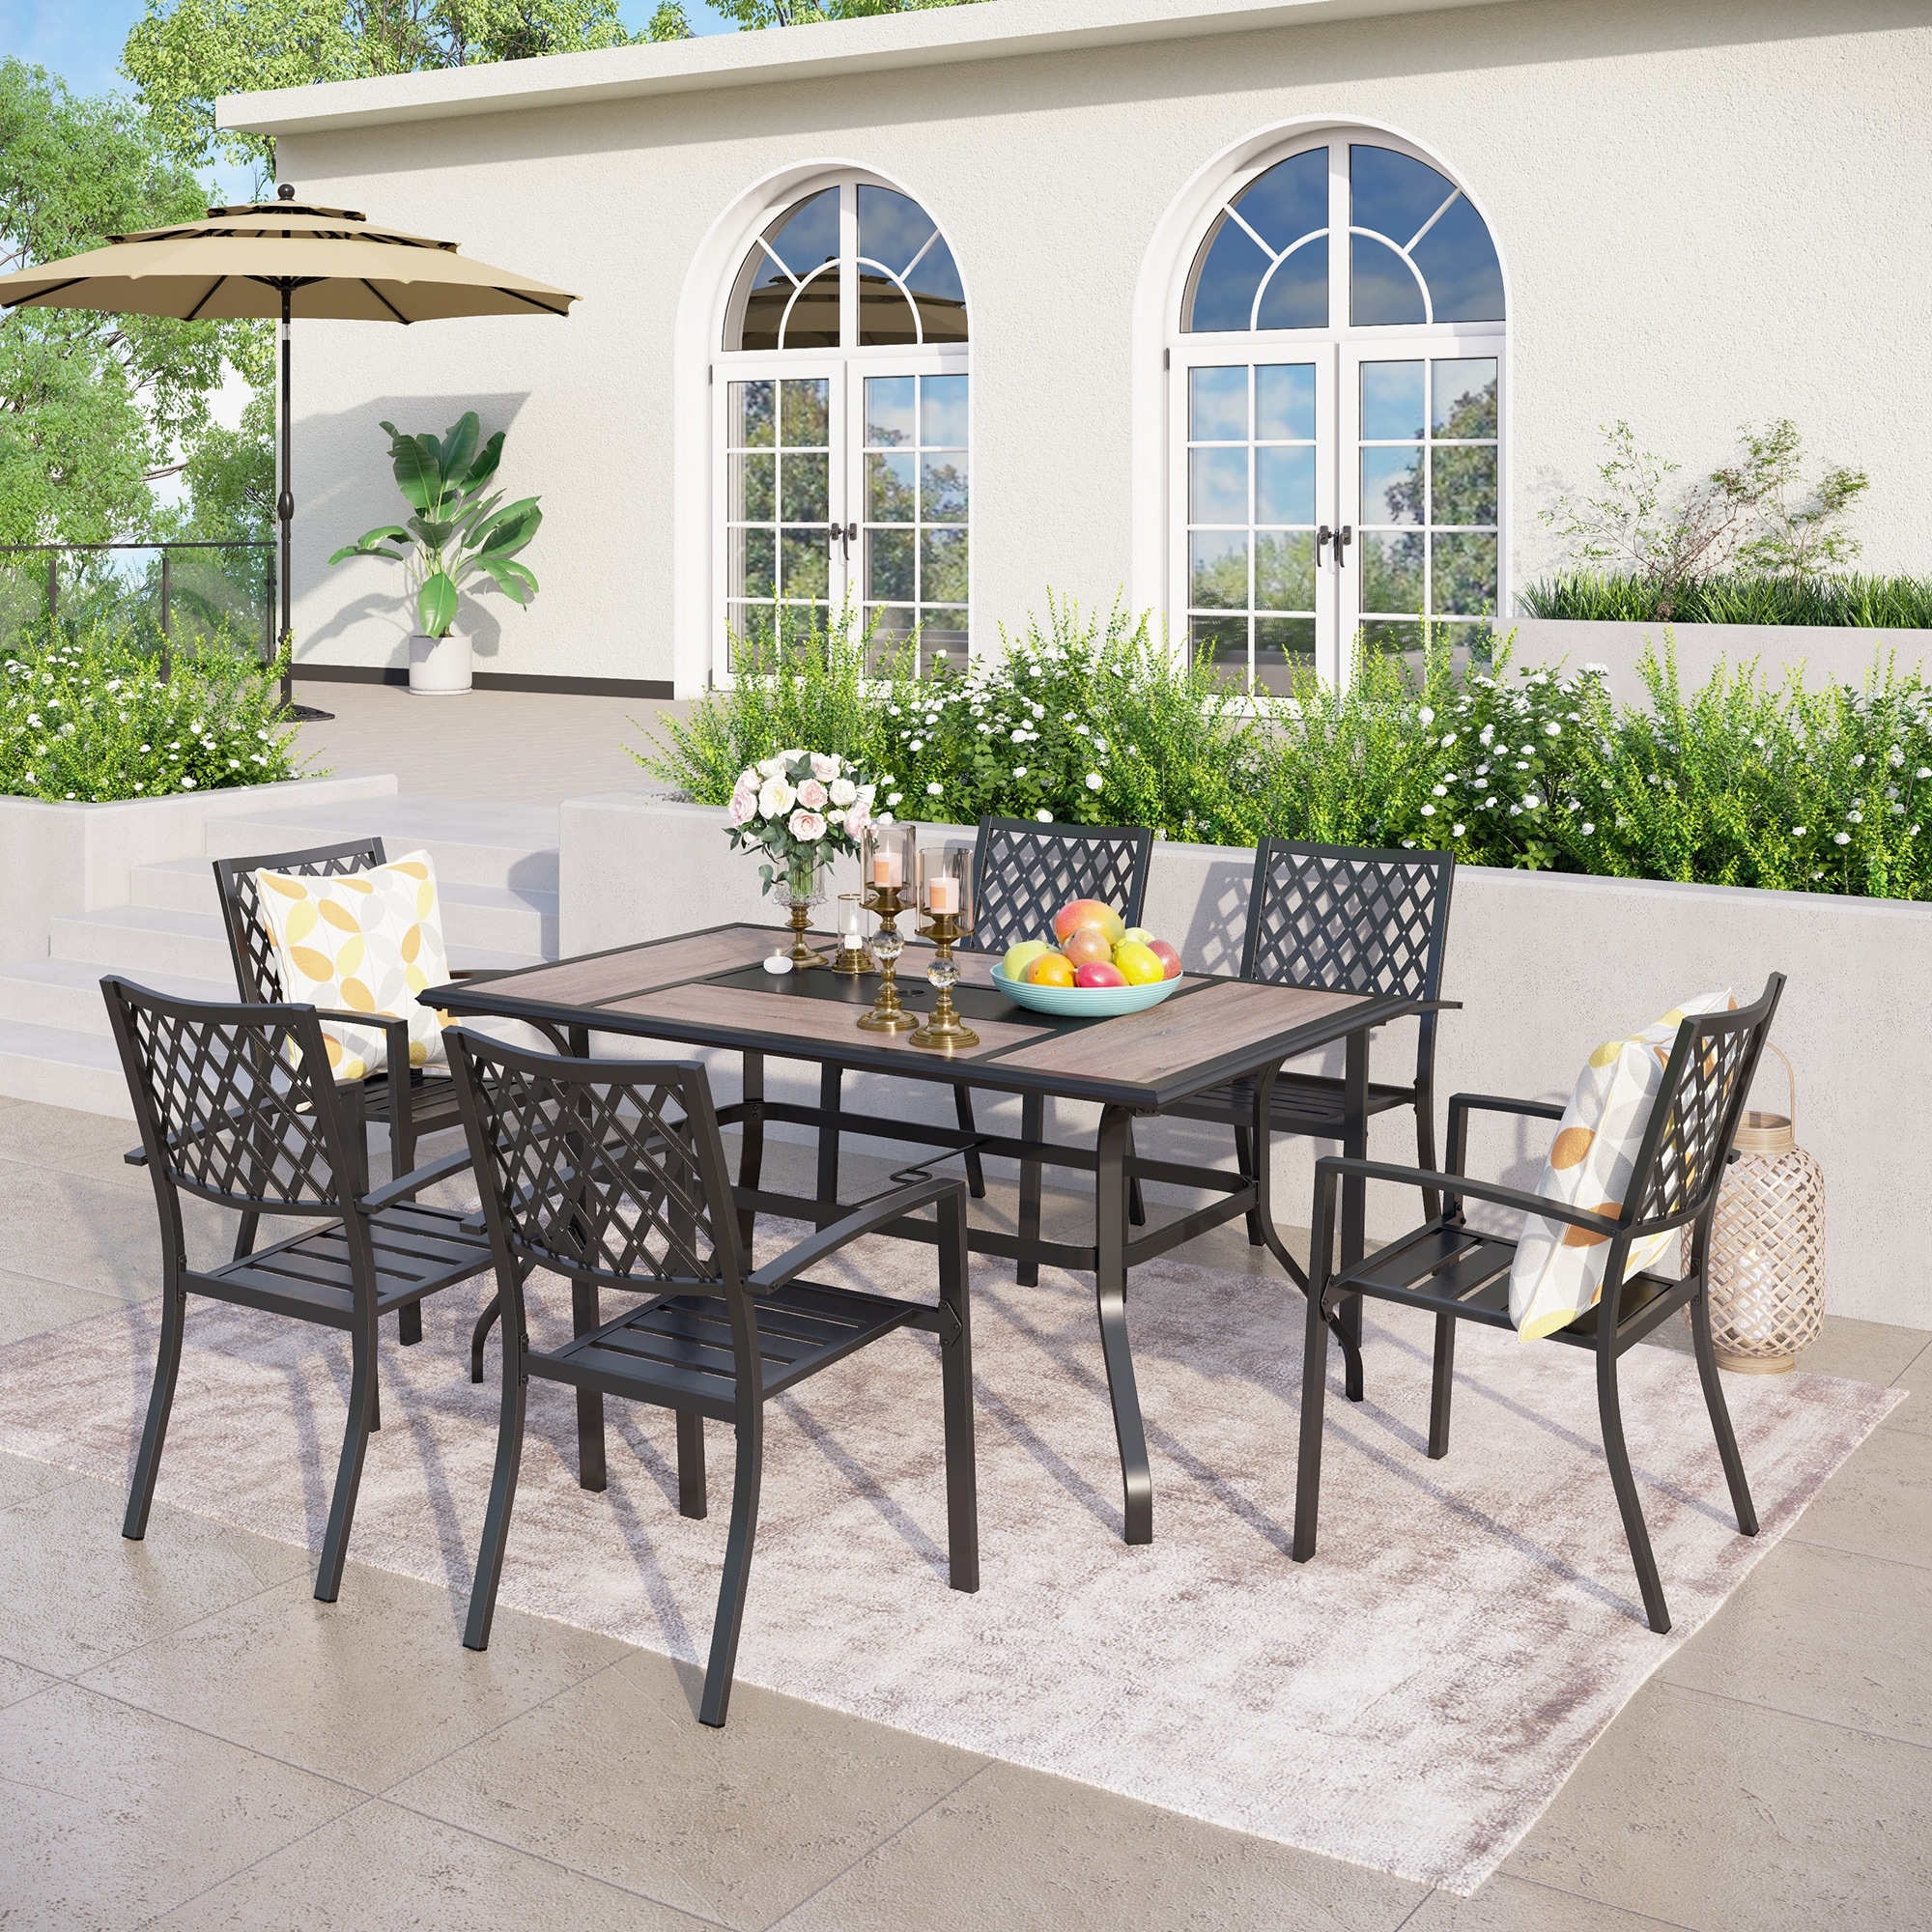 7 Pieces Patio Steel Dining Set With 6 Stackable Steel Dining Chairs And 1 Patio Umbrella Rectangle Table